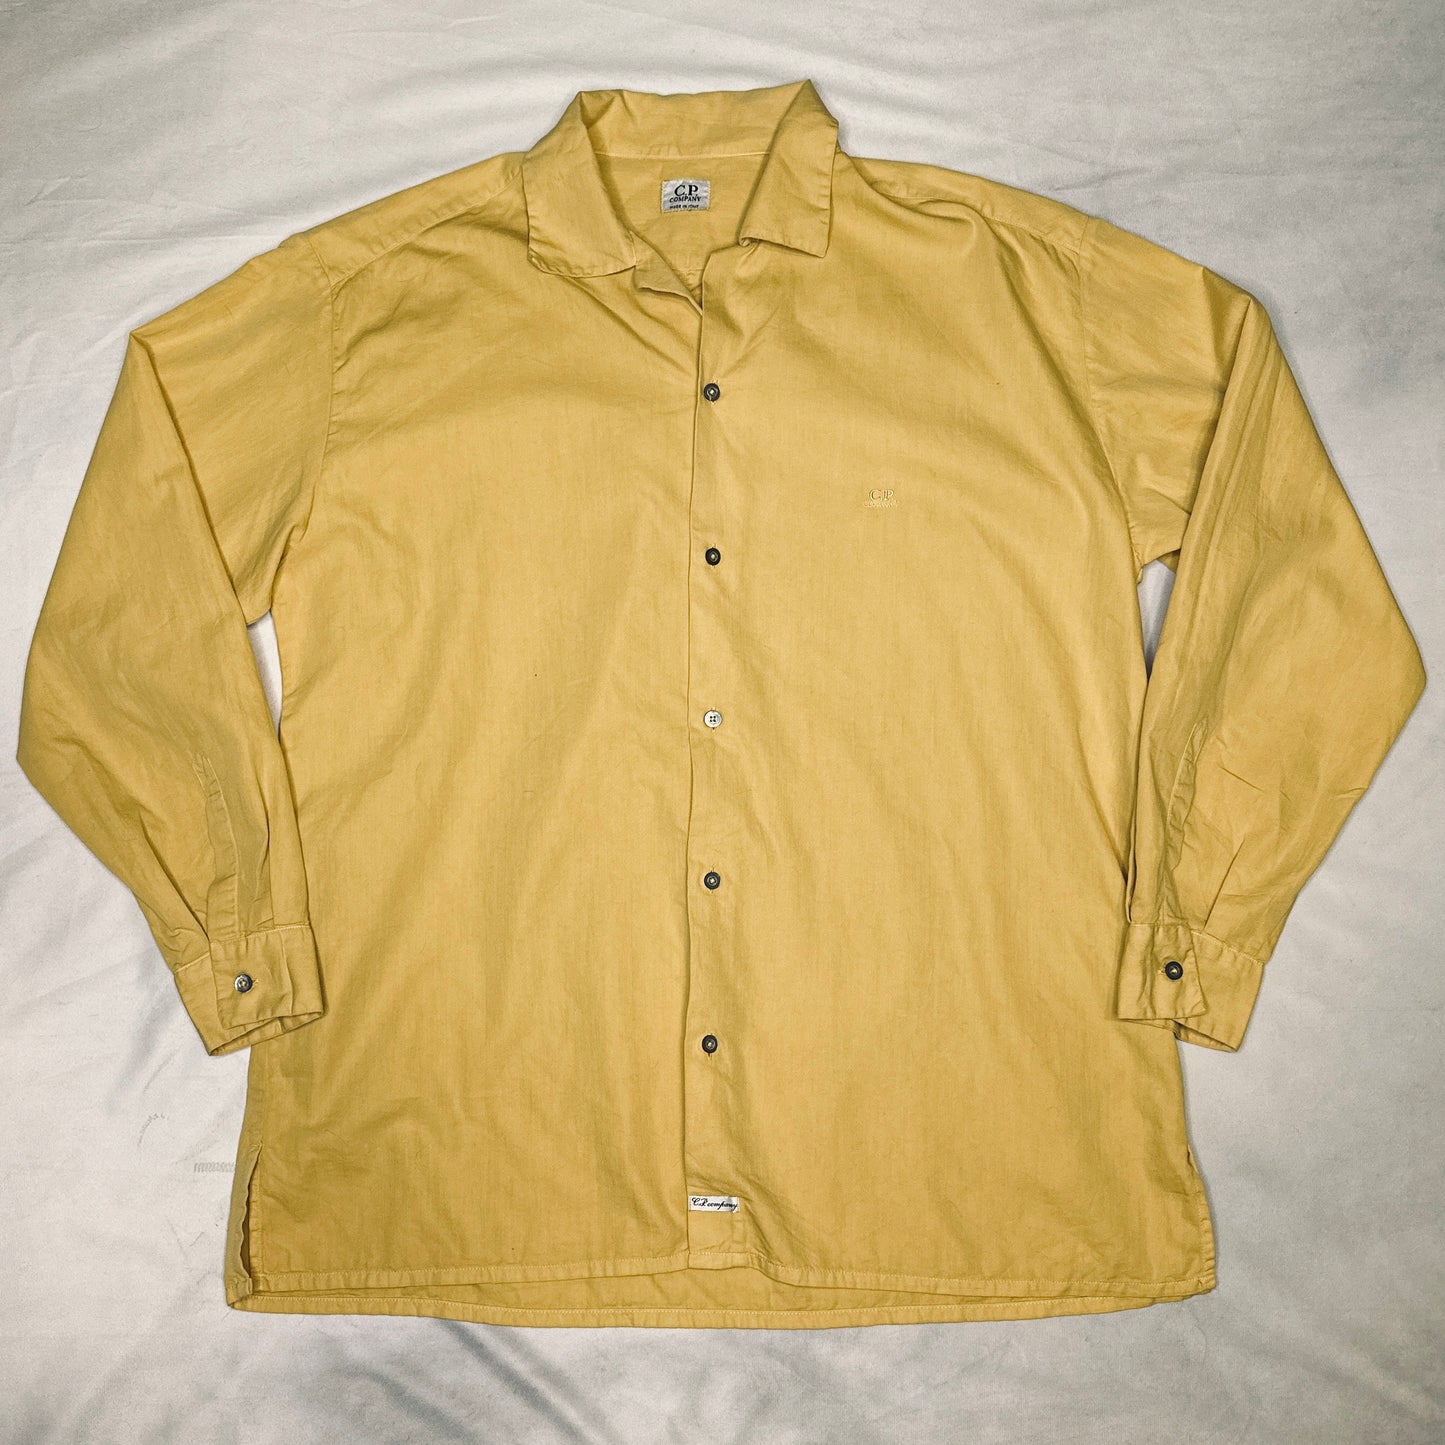 C.P. Company 1997 Button Down Shirt - 4 / XL - Made in Italy